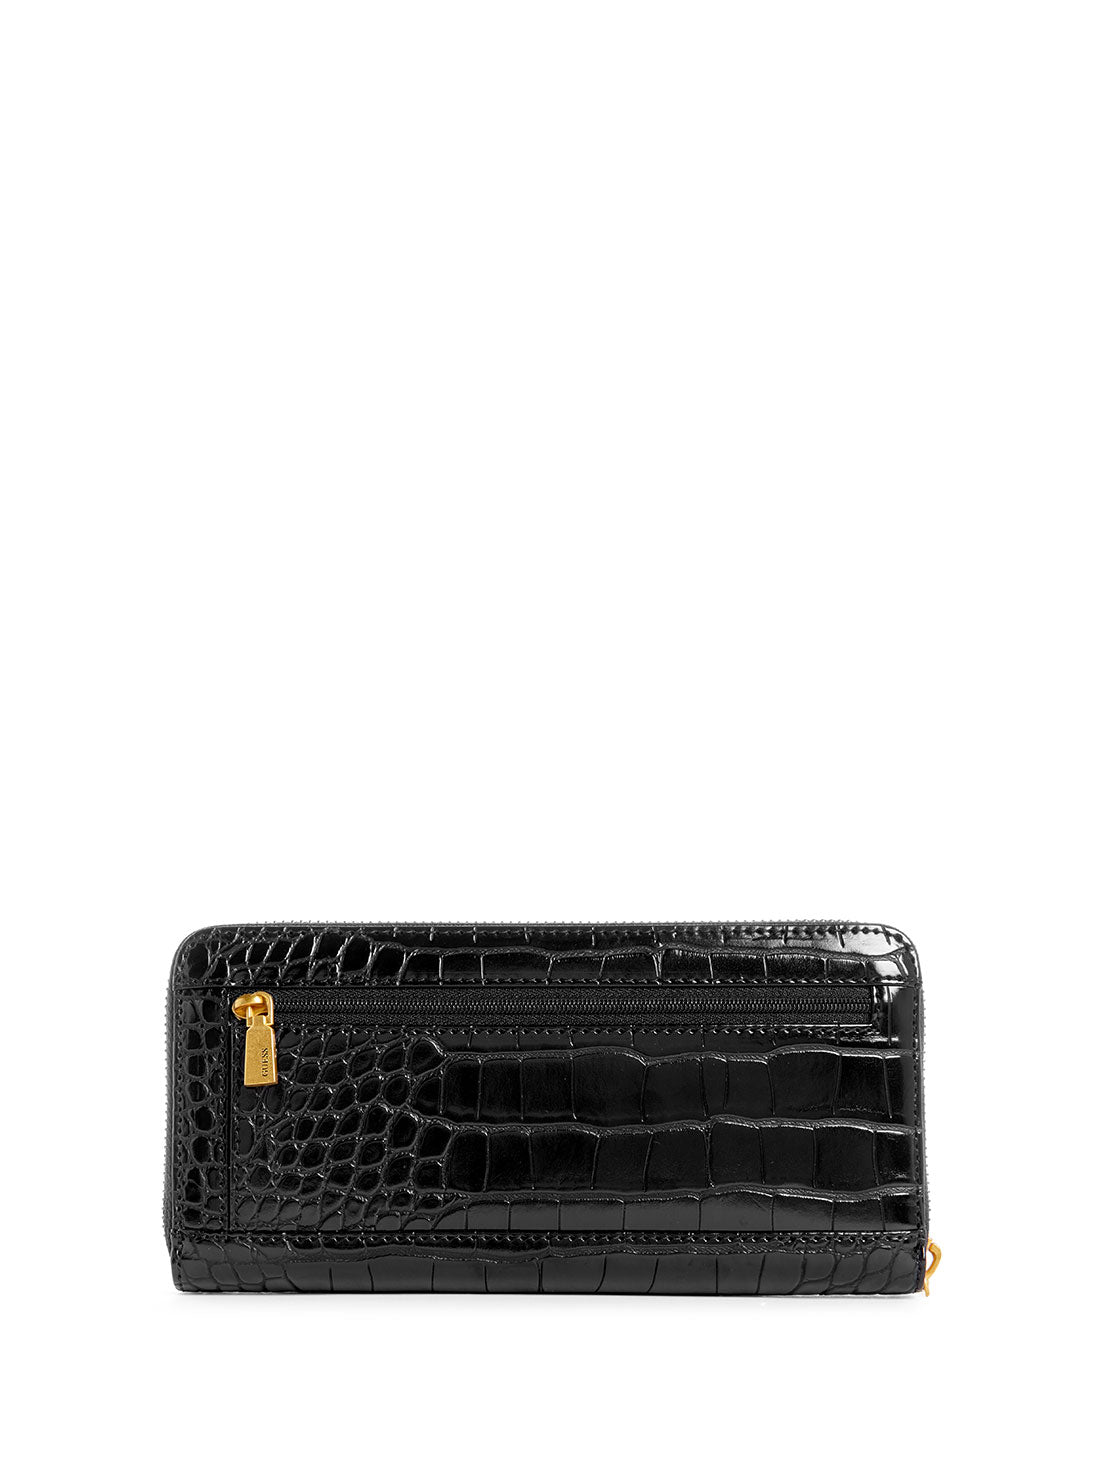 GUESS Women's Black James Croco Large Wallet CA877346 Back View